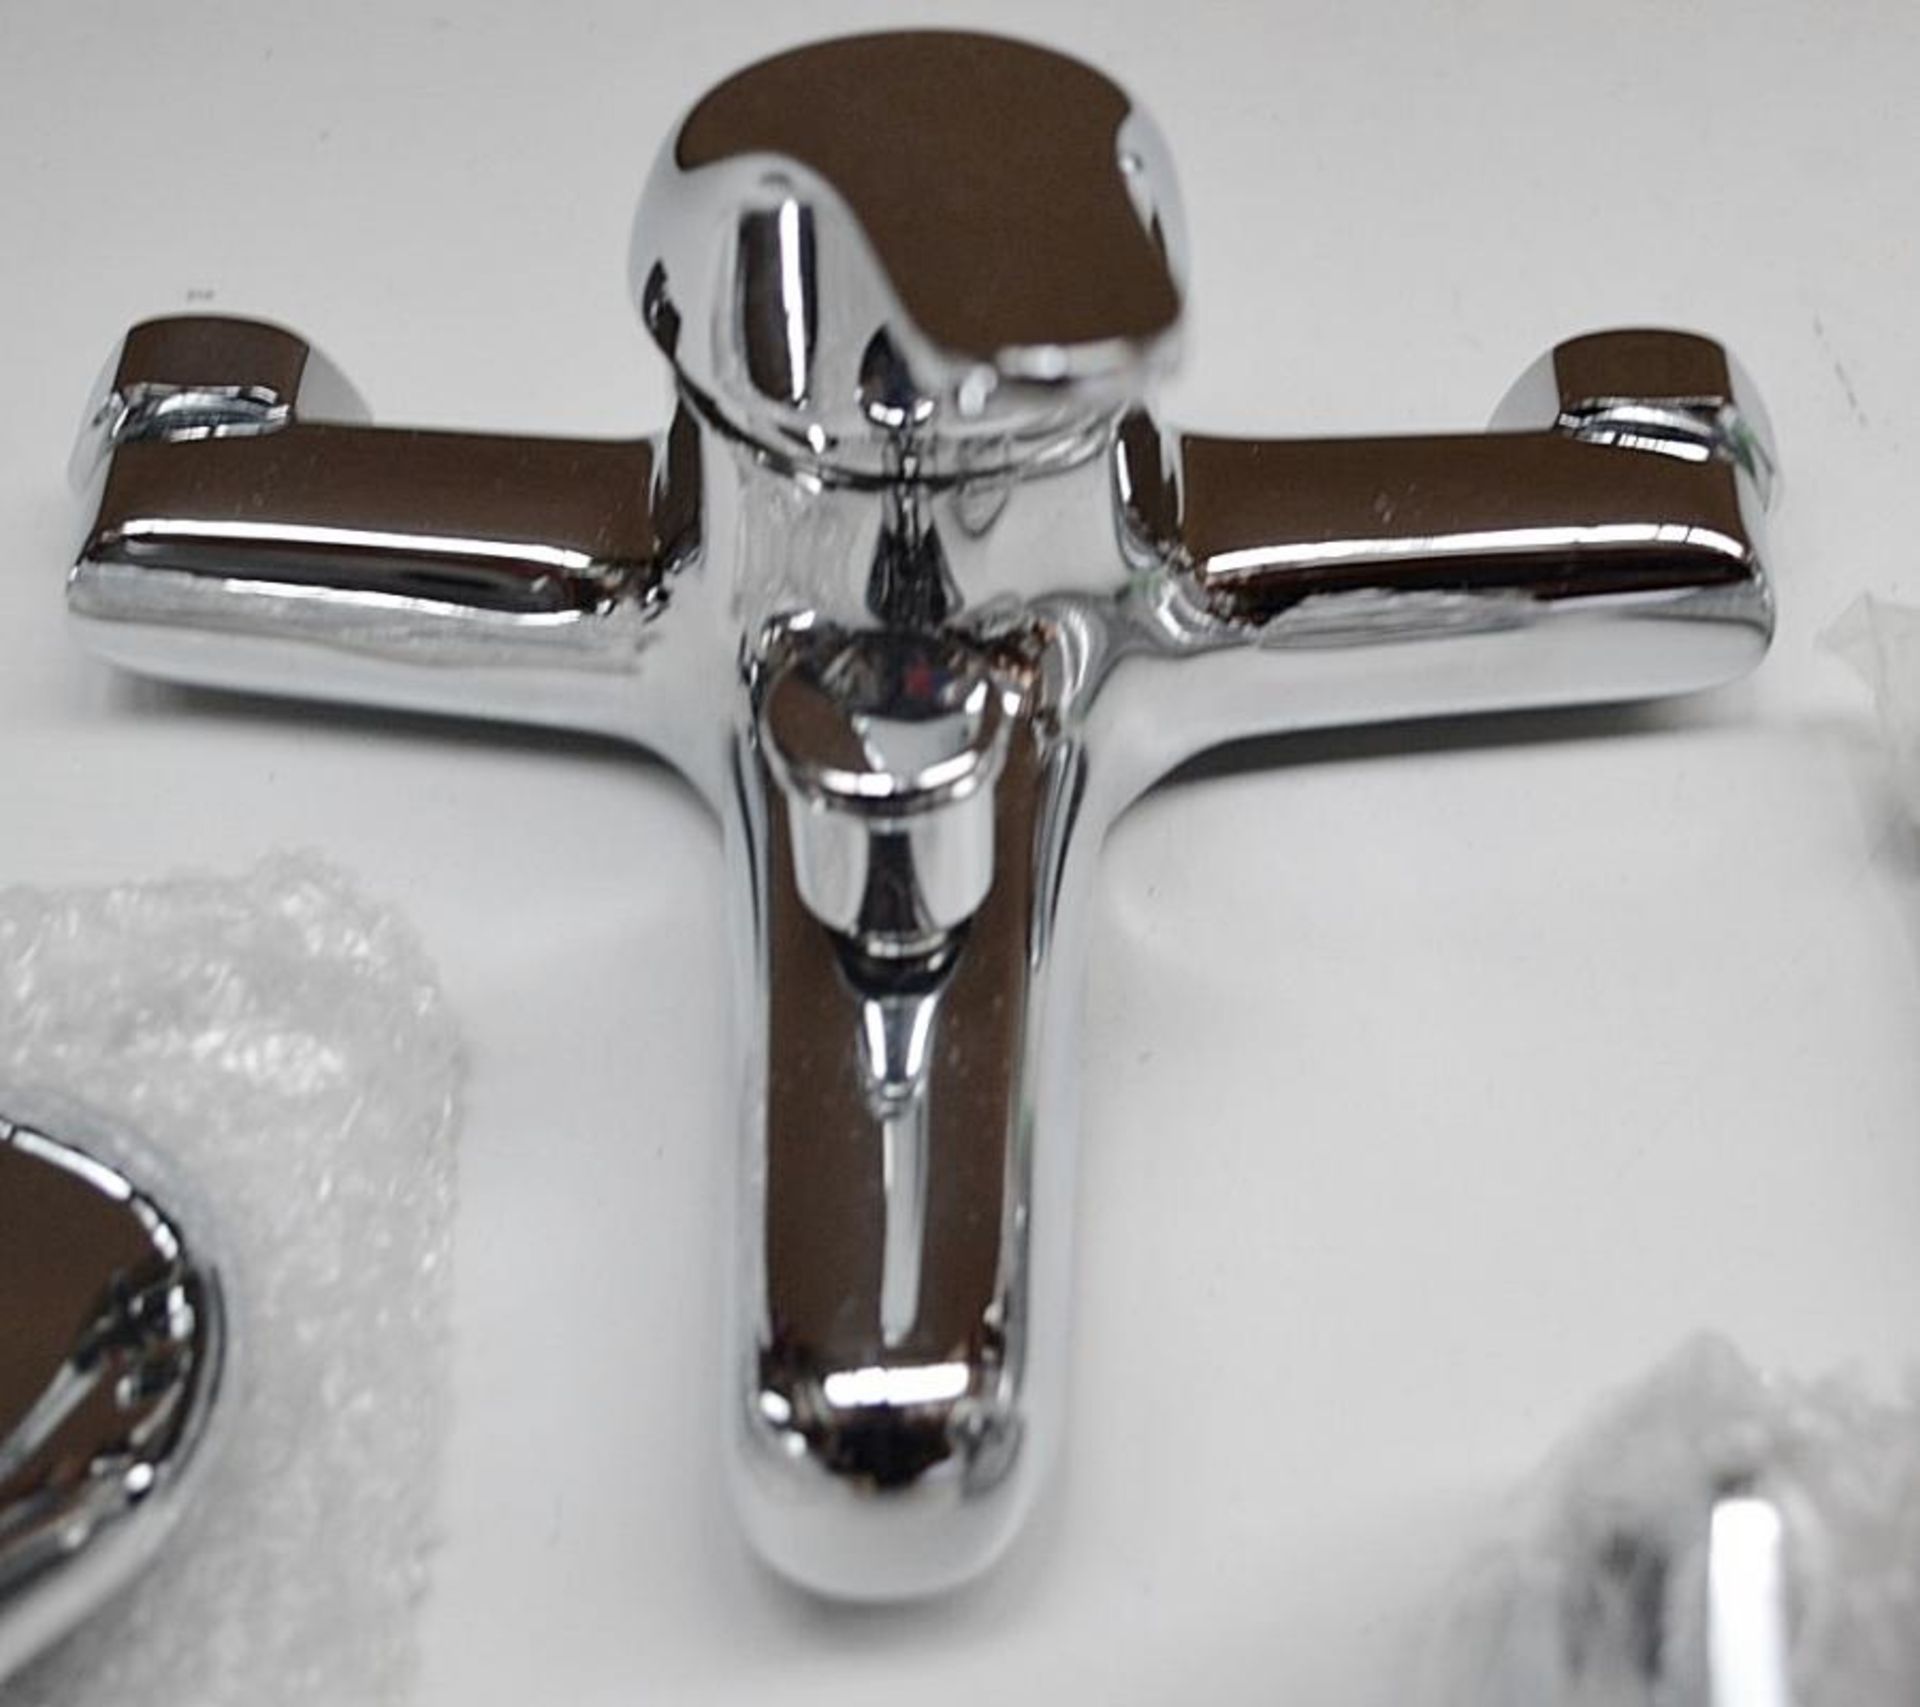 1 x PULSE Single Lever Bath Shower Mixer Tap In Chrome (Model: 112G2) - Ref: M188 - CL190 - Unused B - Image 3 of 7